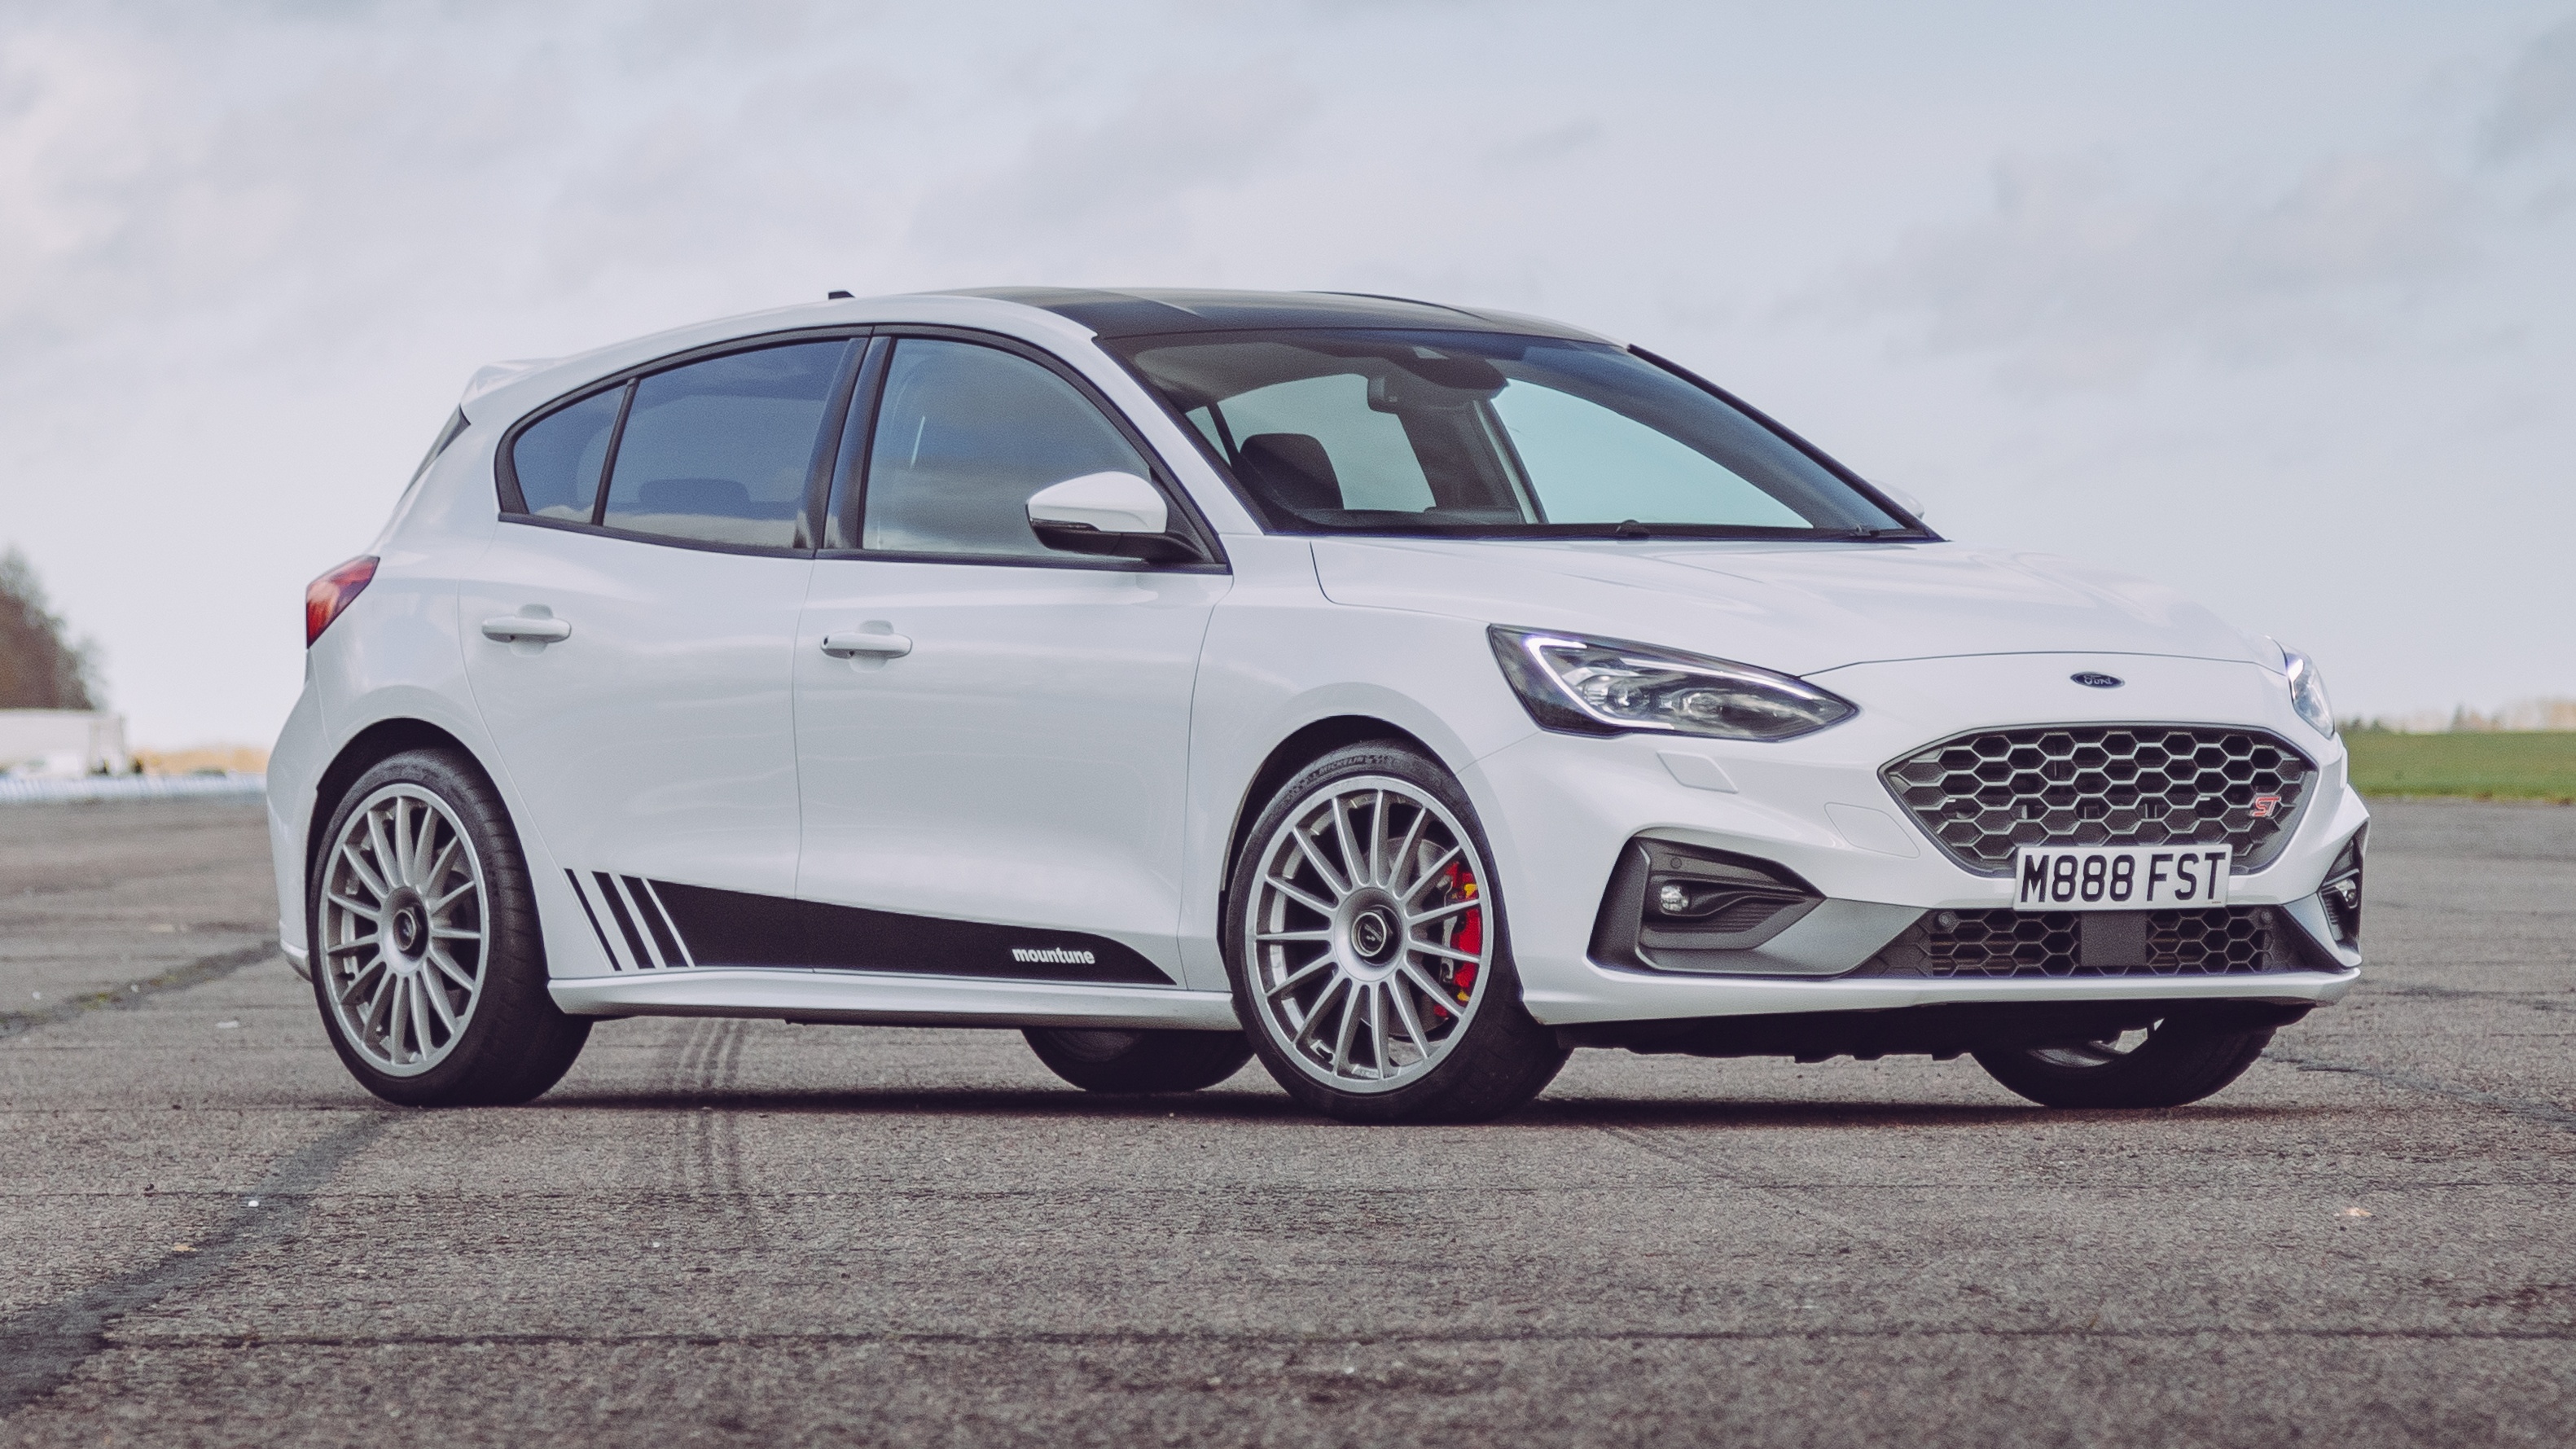 News - Mountune Boosts The Ford Focus ST To 243kW, But Not Oz Bound